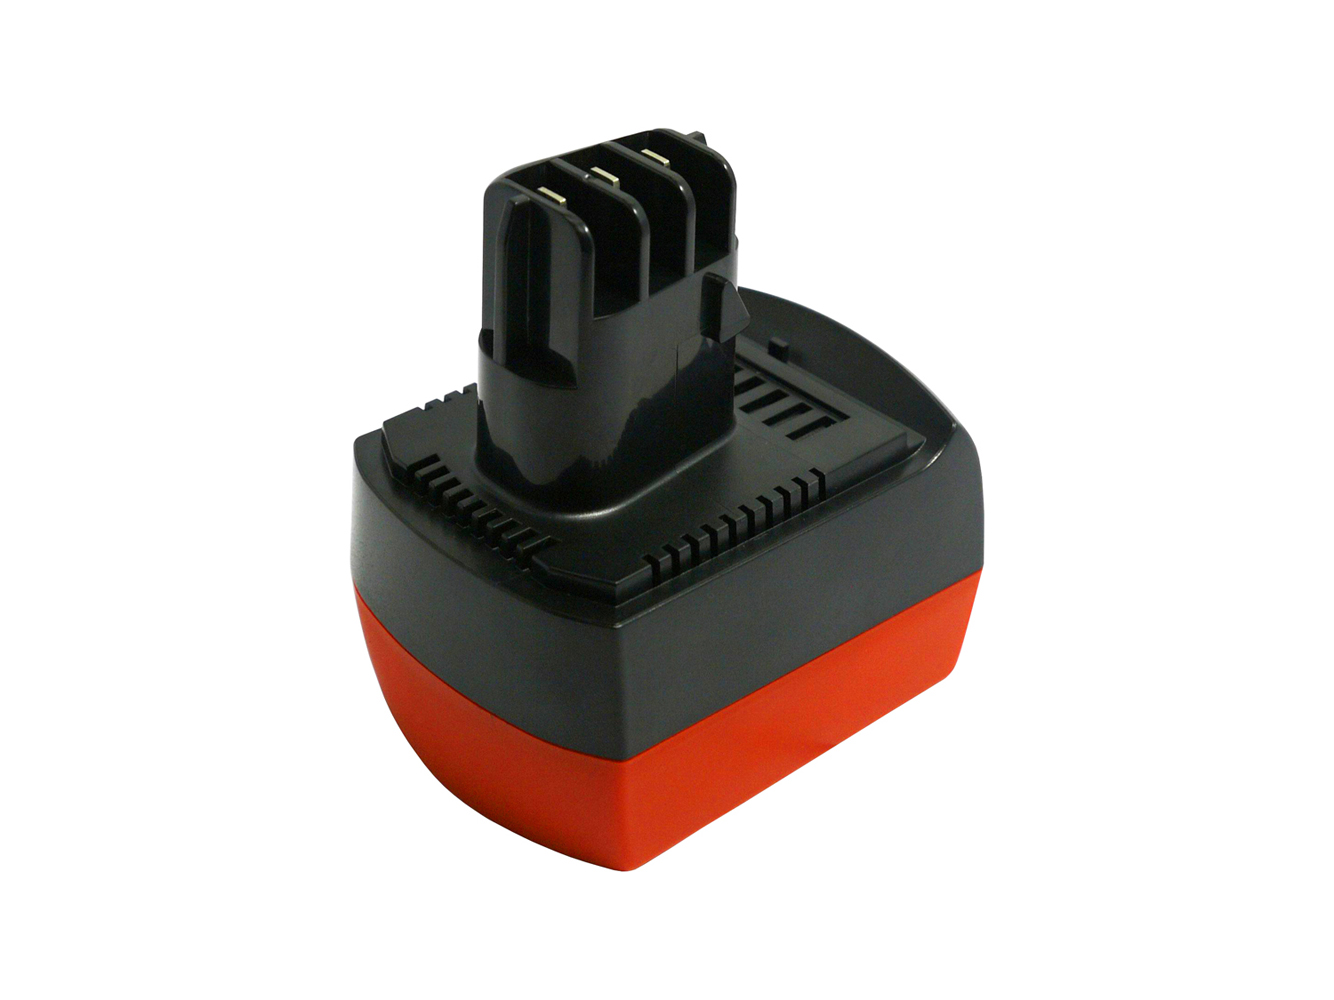 Metabo 6.02151.50, 6.25473 Power Tool Battery For Bs 12 Sp, Bsz 12 replacement